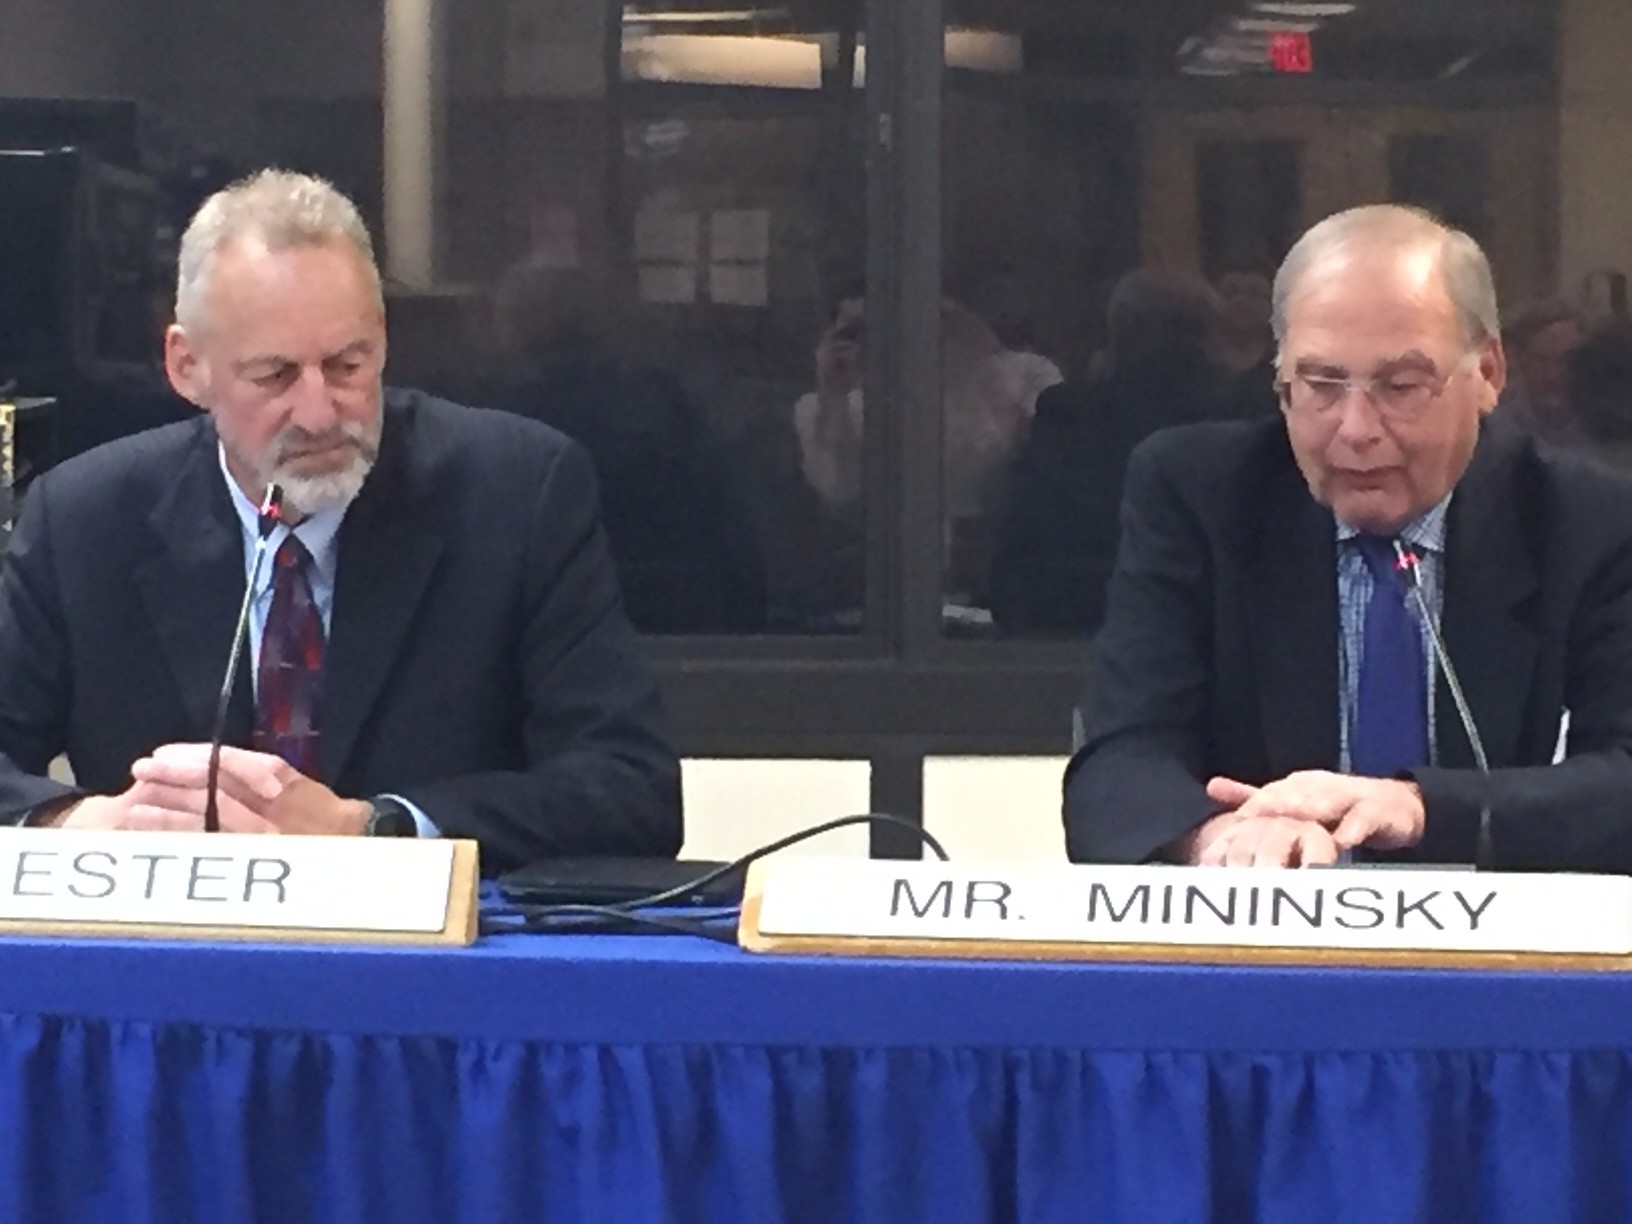 Board of Education Vice President Stewart Mininsky, right, called the election results “bitter sweet,” as he commended Lester's service to the board and welcomed Bodnar to the elected body.